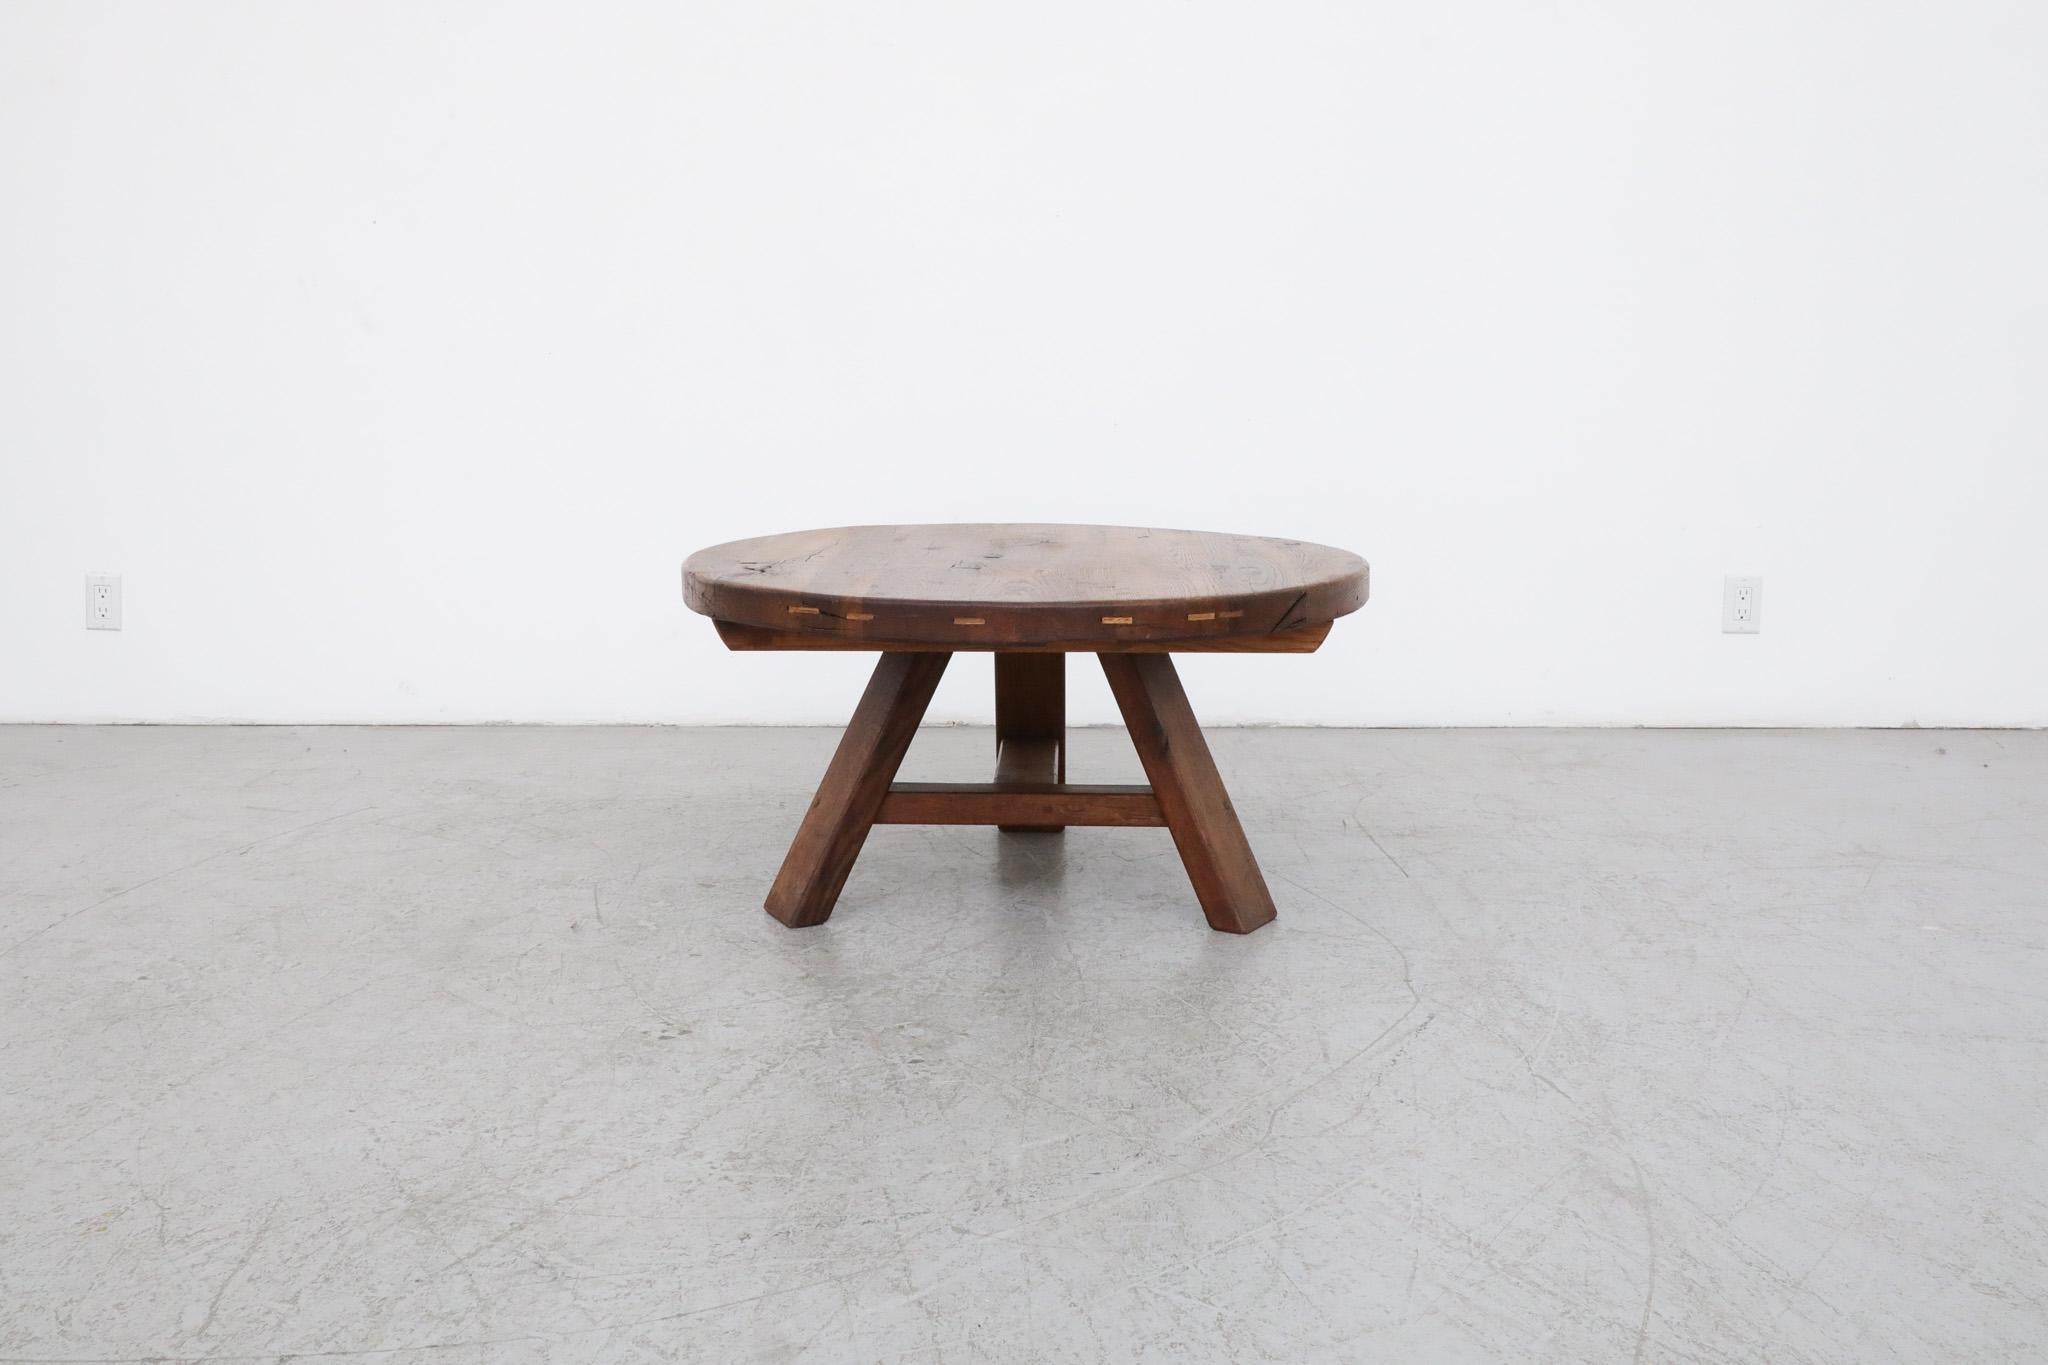 This handsome, Brutalist, Pierre Chapo inspired coffee or side table is made from solid oak with a generous round top and attractive tripod trestle base. The piece is in original condition with some visible wear, including some natural cracking.